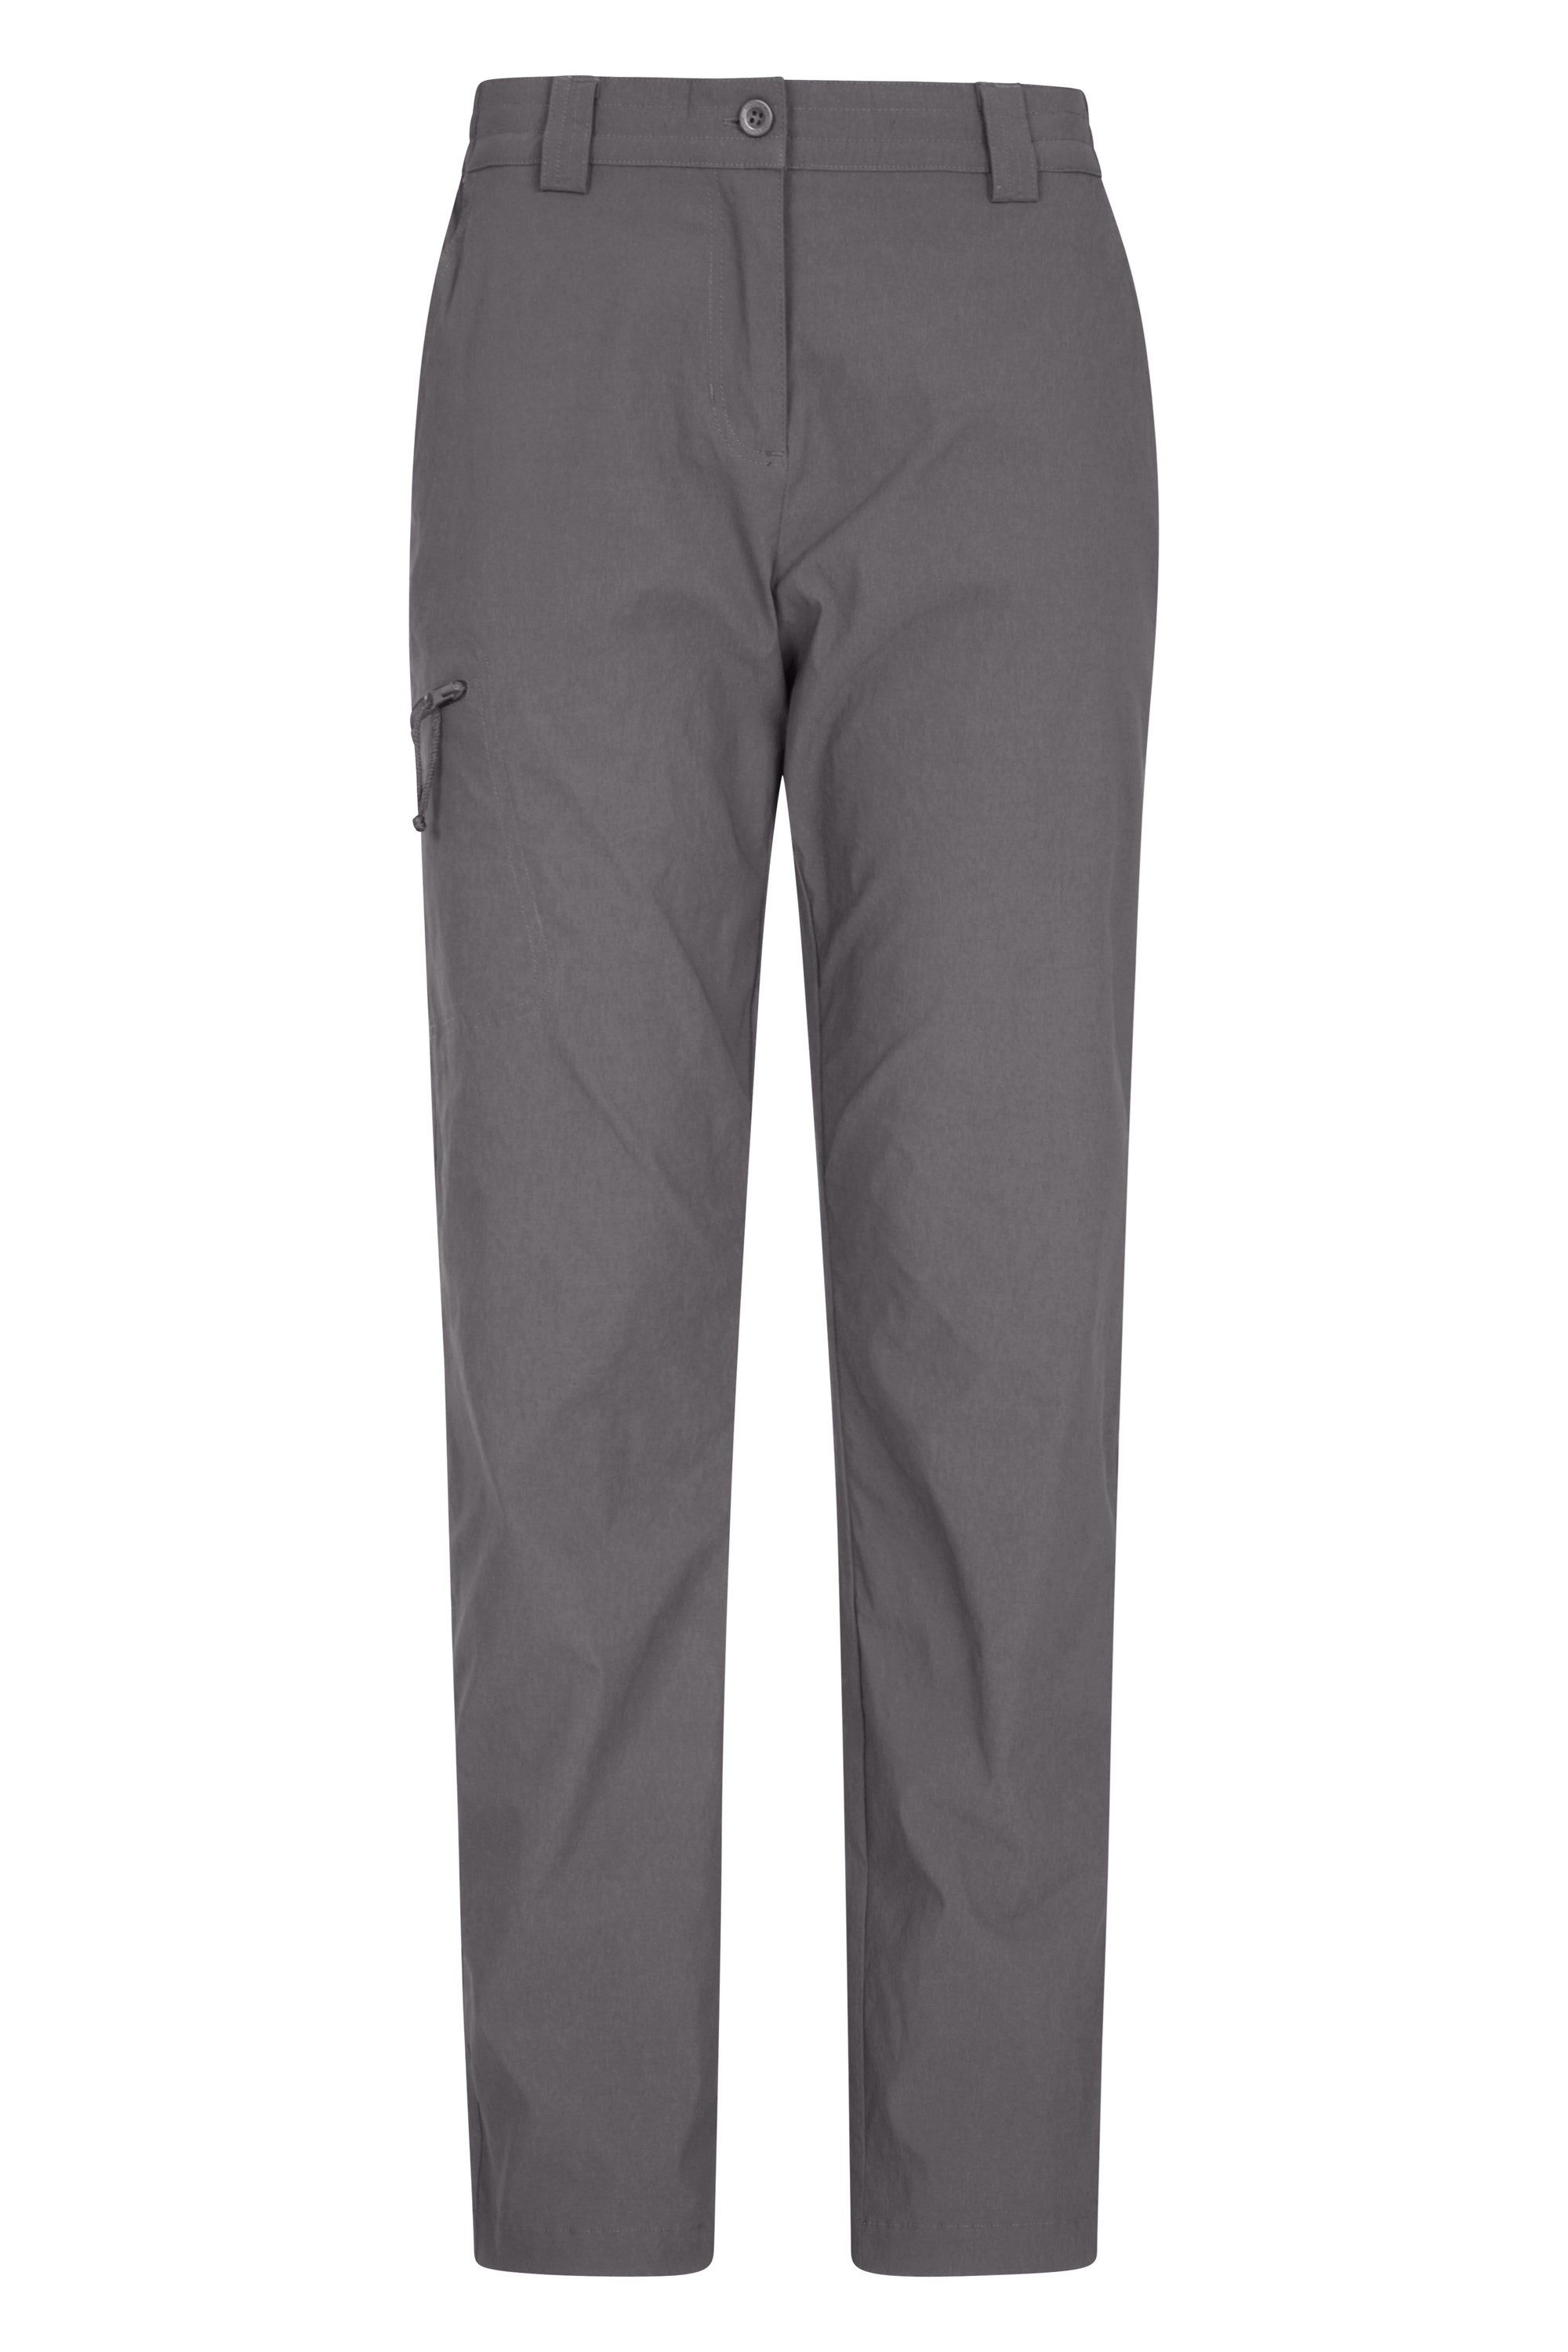 Hiker Stretch Womens Trousers - Grey